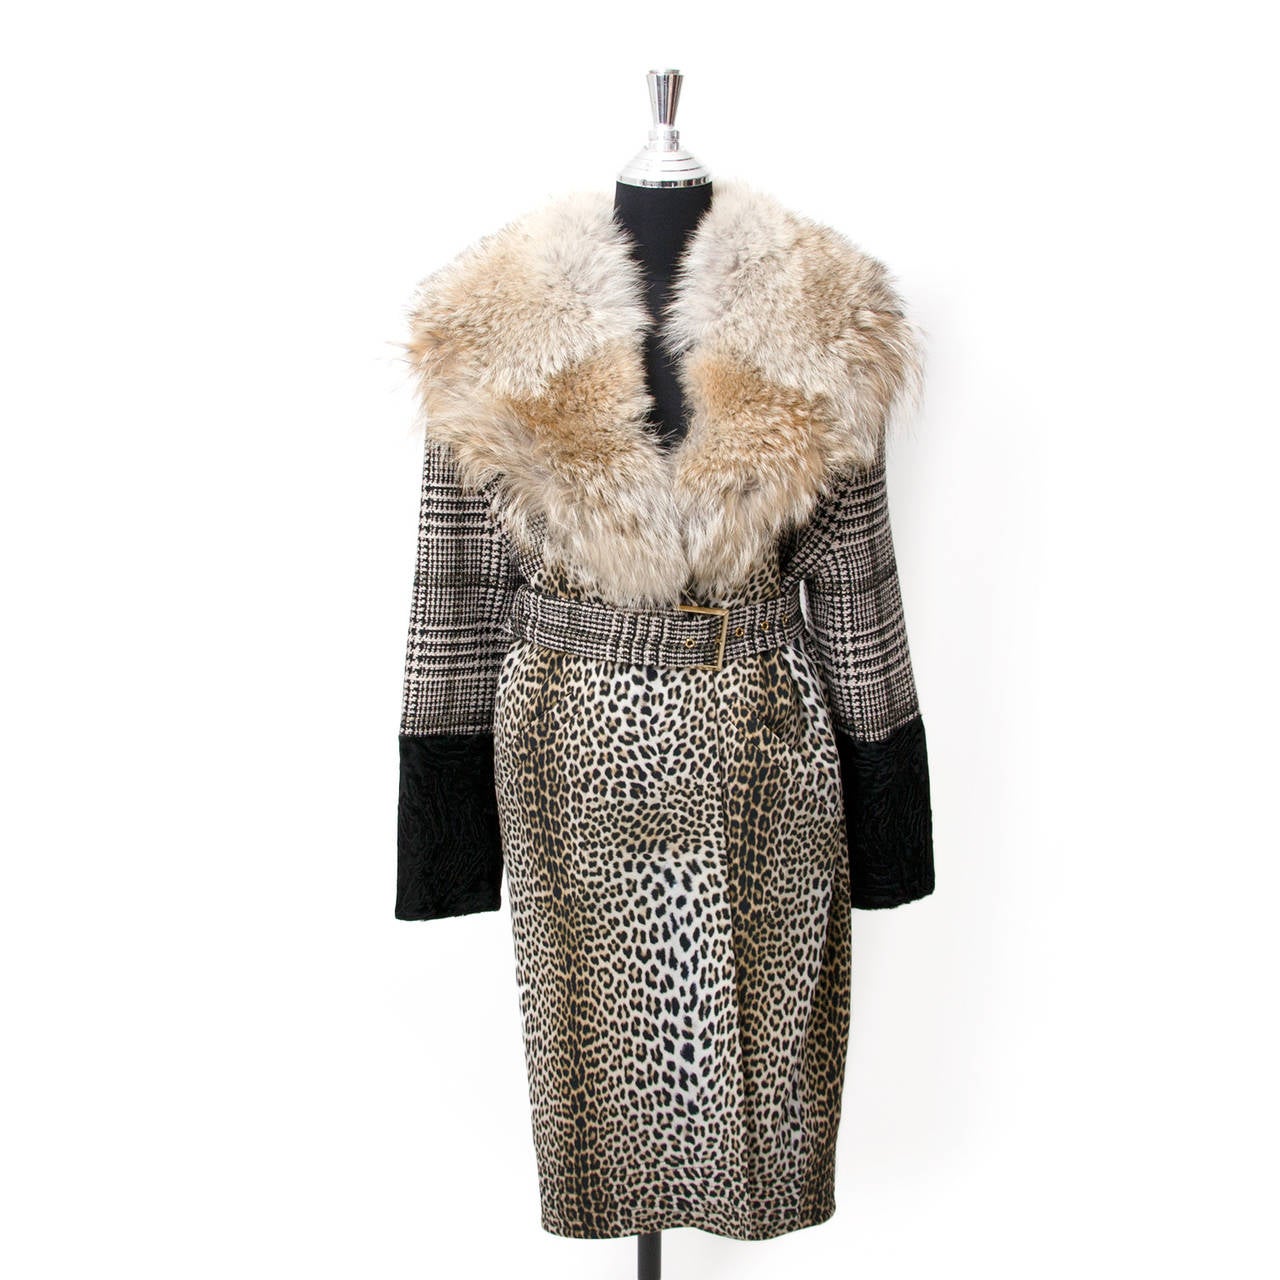 A mid-long furcoat with fox collar. The coat's top is tweed with a classic pattern. The bottom hald is nylon with leopard print. The sleeves have astrakhan cuffs. Comes with belt, to be worn as an opluent trench. Great contemporary style!